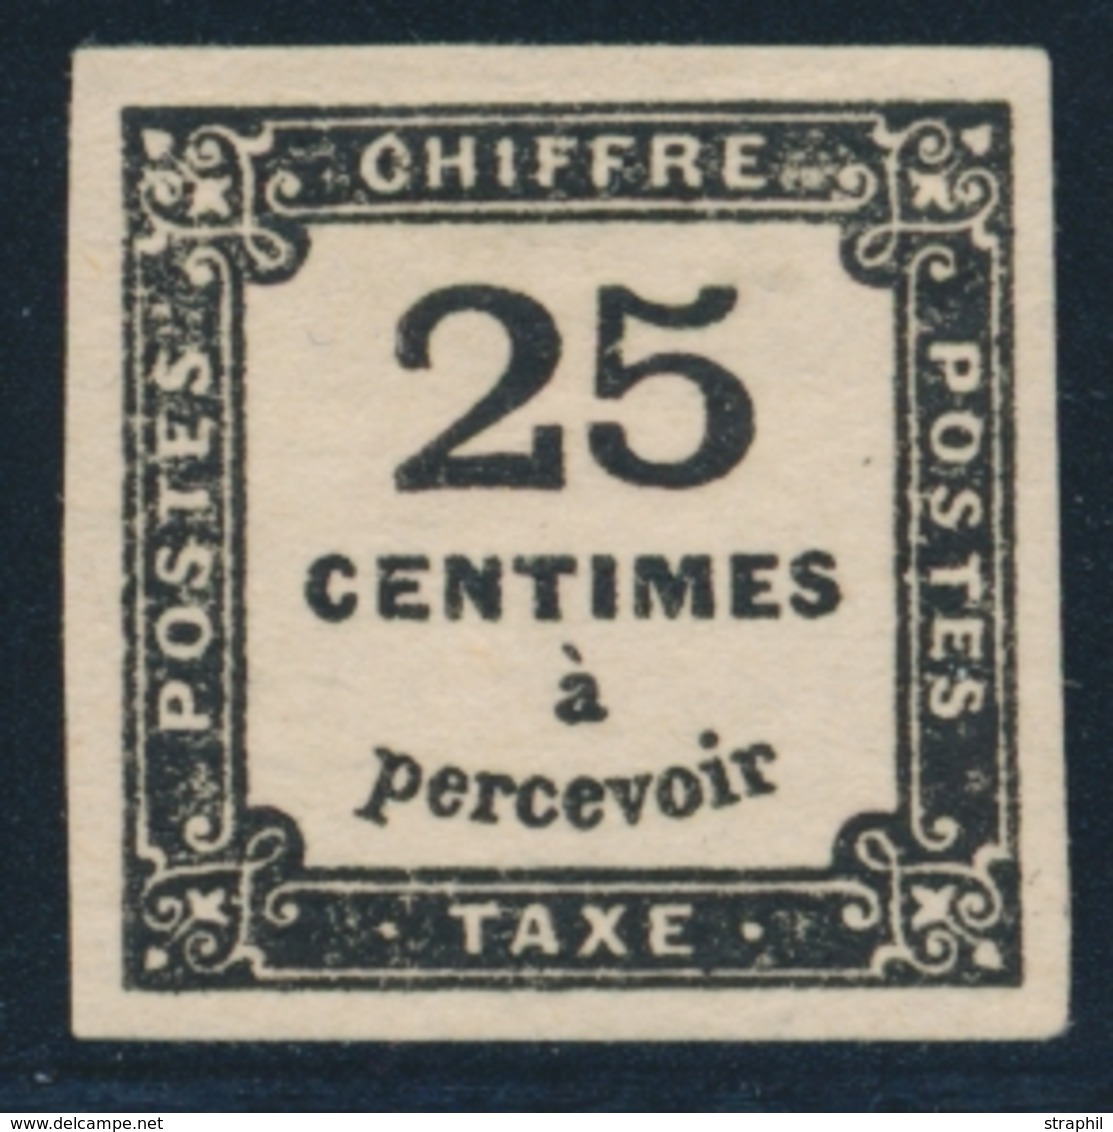 * TIMBRES TAXE - * - N°5 - 25c Noir - TB - 1859-1959 Mint/hinged